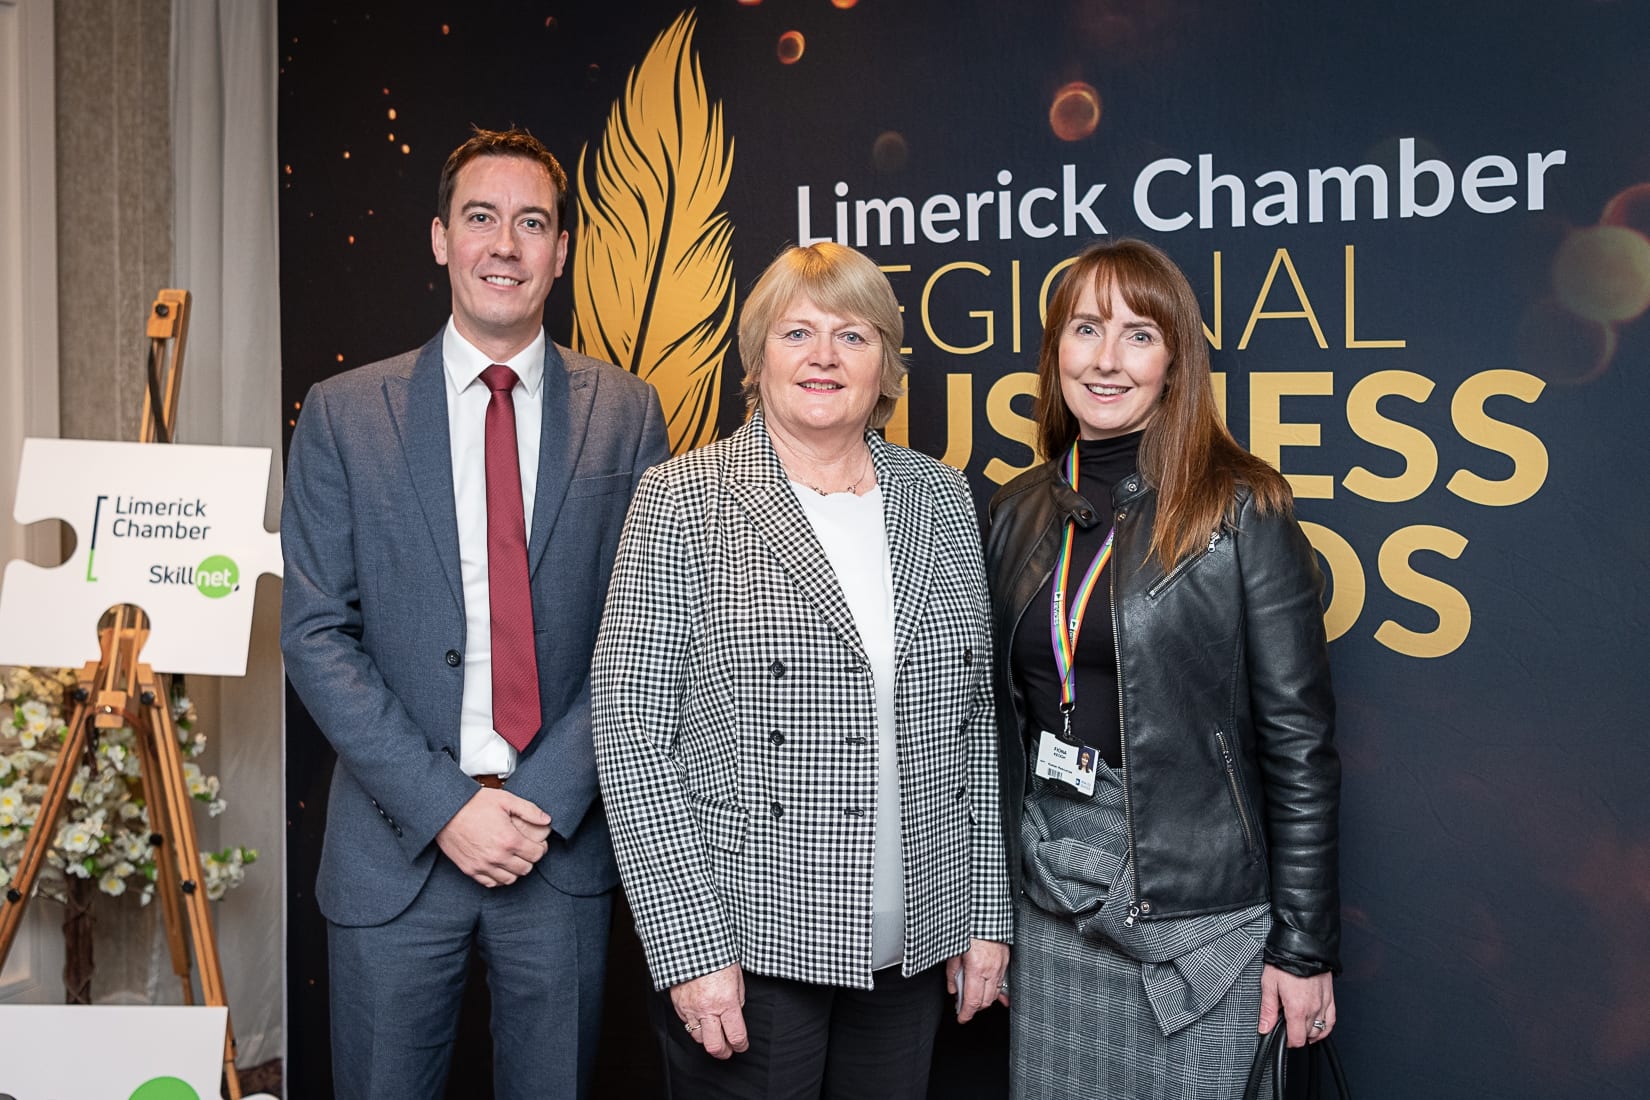 No repro fee-Limerick Chamber President Dinner Shortlist announcement which was held in The Limerick Strand Hotel on Wednesday 16th October  - From Left to Right: Niall O’Callaghan - Shannon Hertitage, Bernie Moloney - LEO, Fiona Keogh- Analog Devices
Photo credit Shauna Kennedy